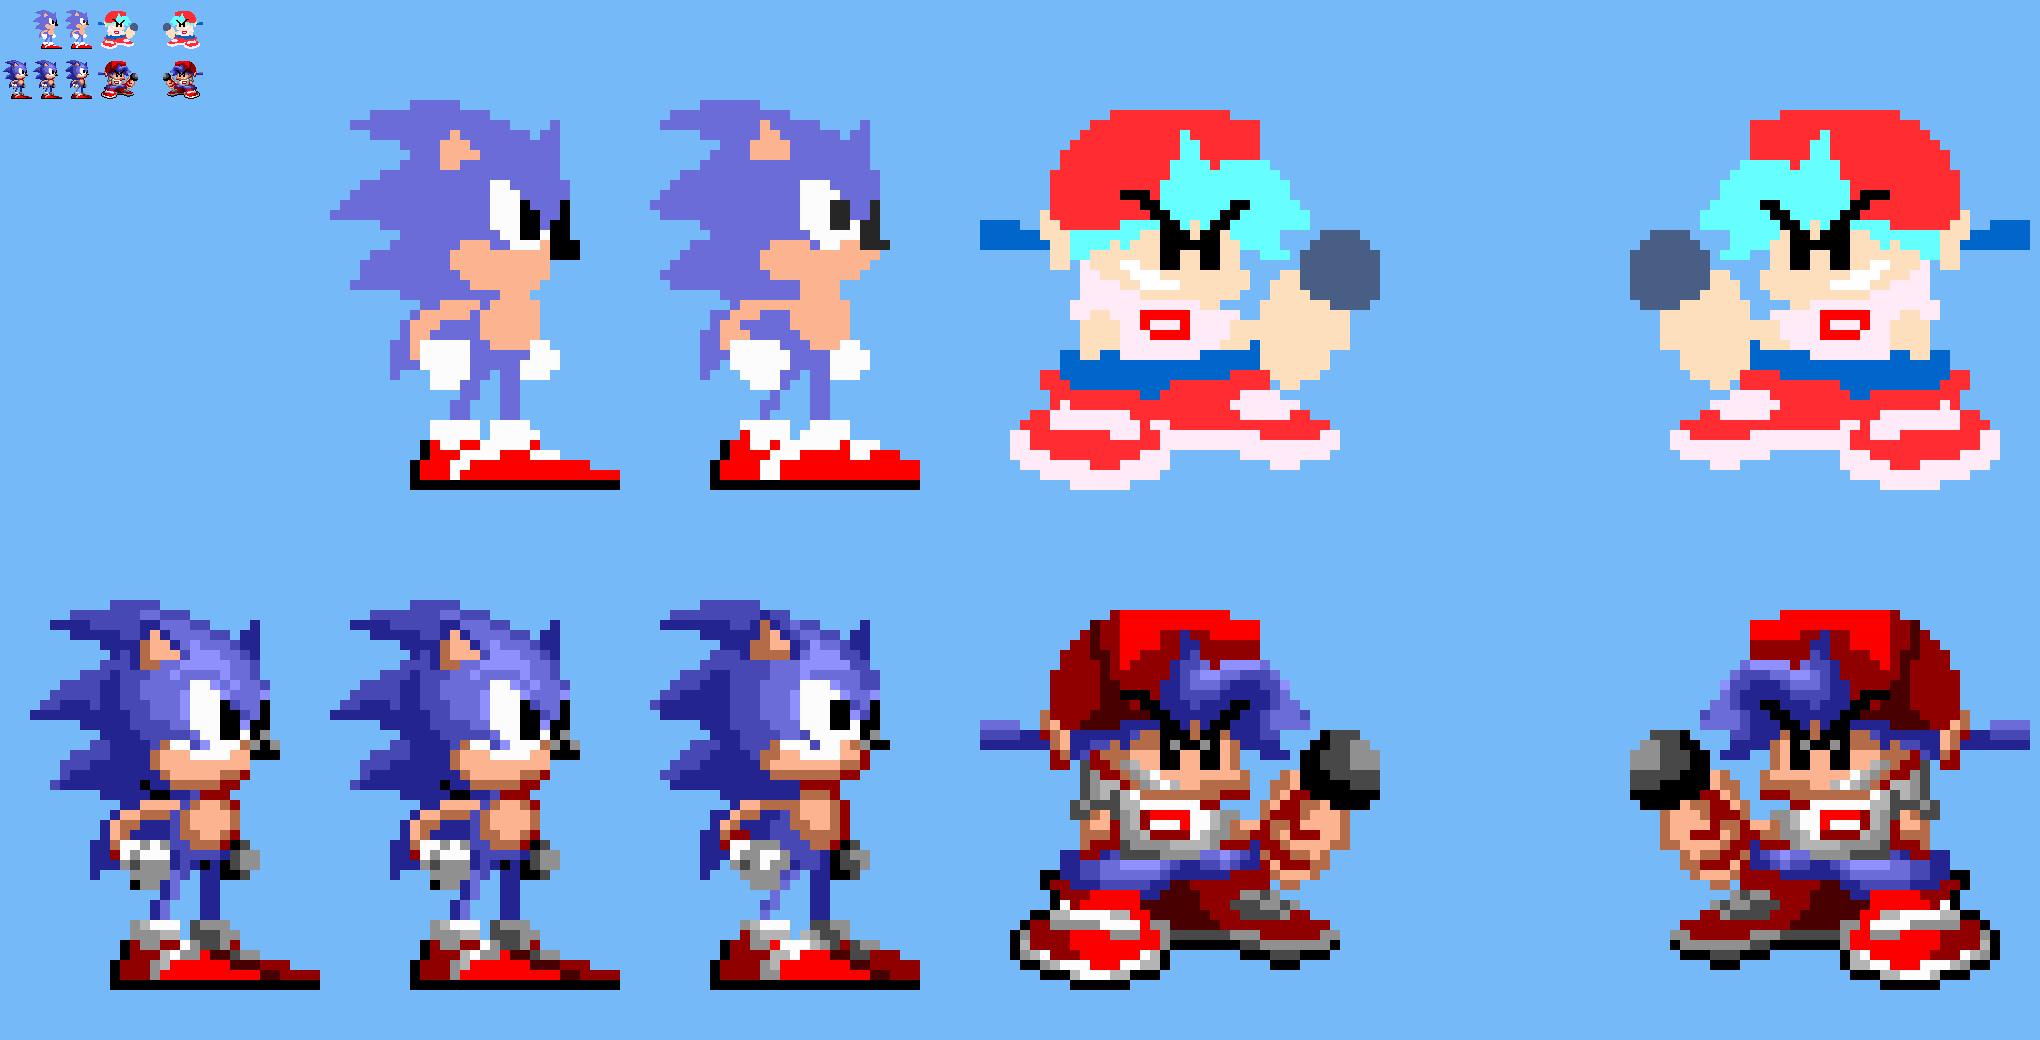 Rip out some custom sprites for S1 Sonic - Comic Studio